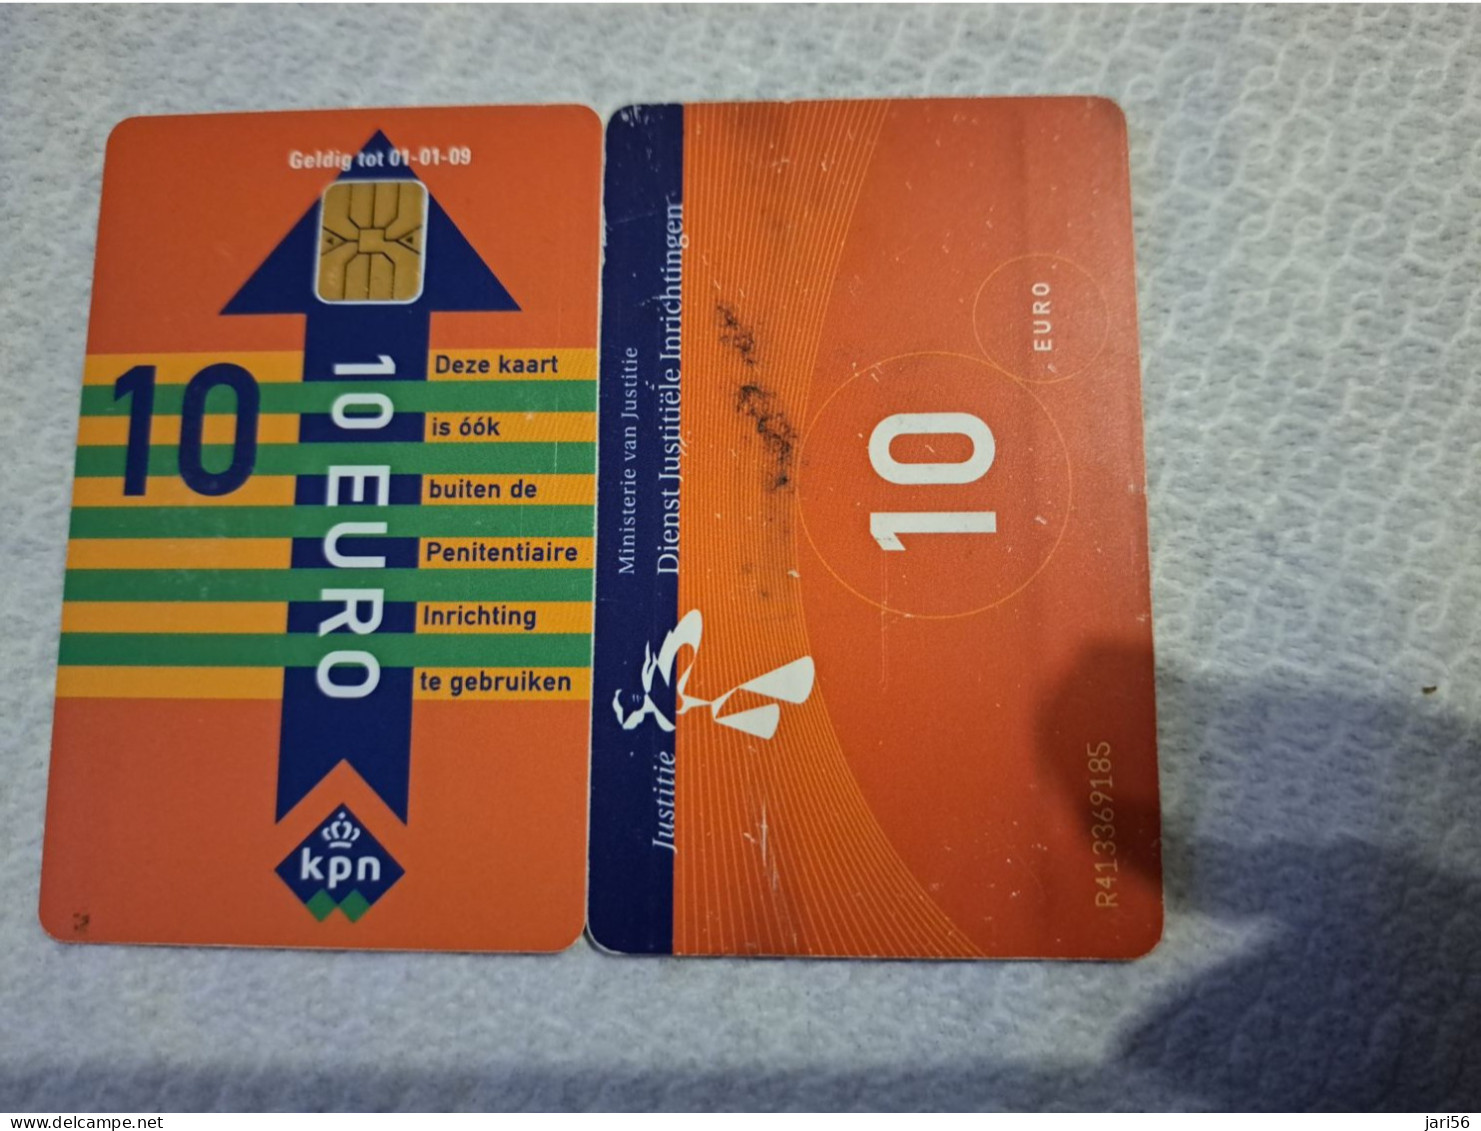 NETHERLANDS   € 10,-   / USED  / DATE  01-01-09  JUSTITIE/PRISON CARD  CHIP CARD/ USED   ** 16162** - Schede GSM, Prepagate E Ricariche